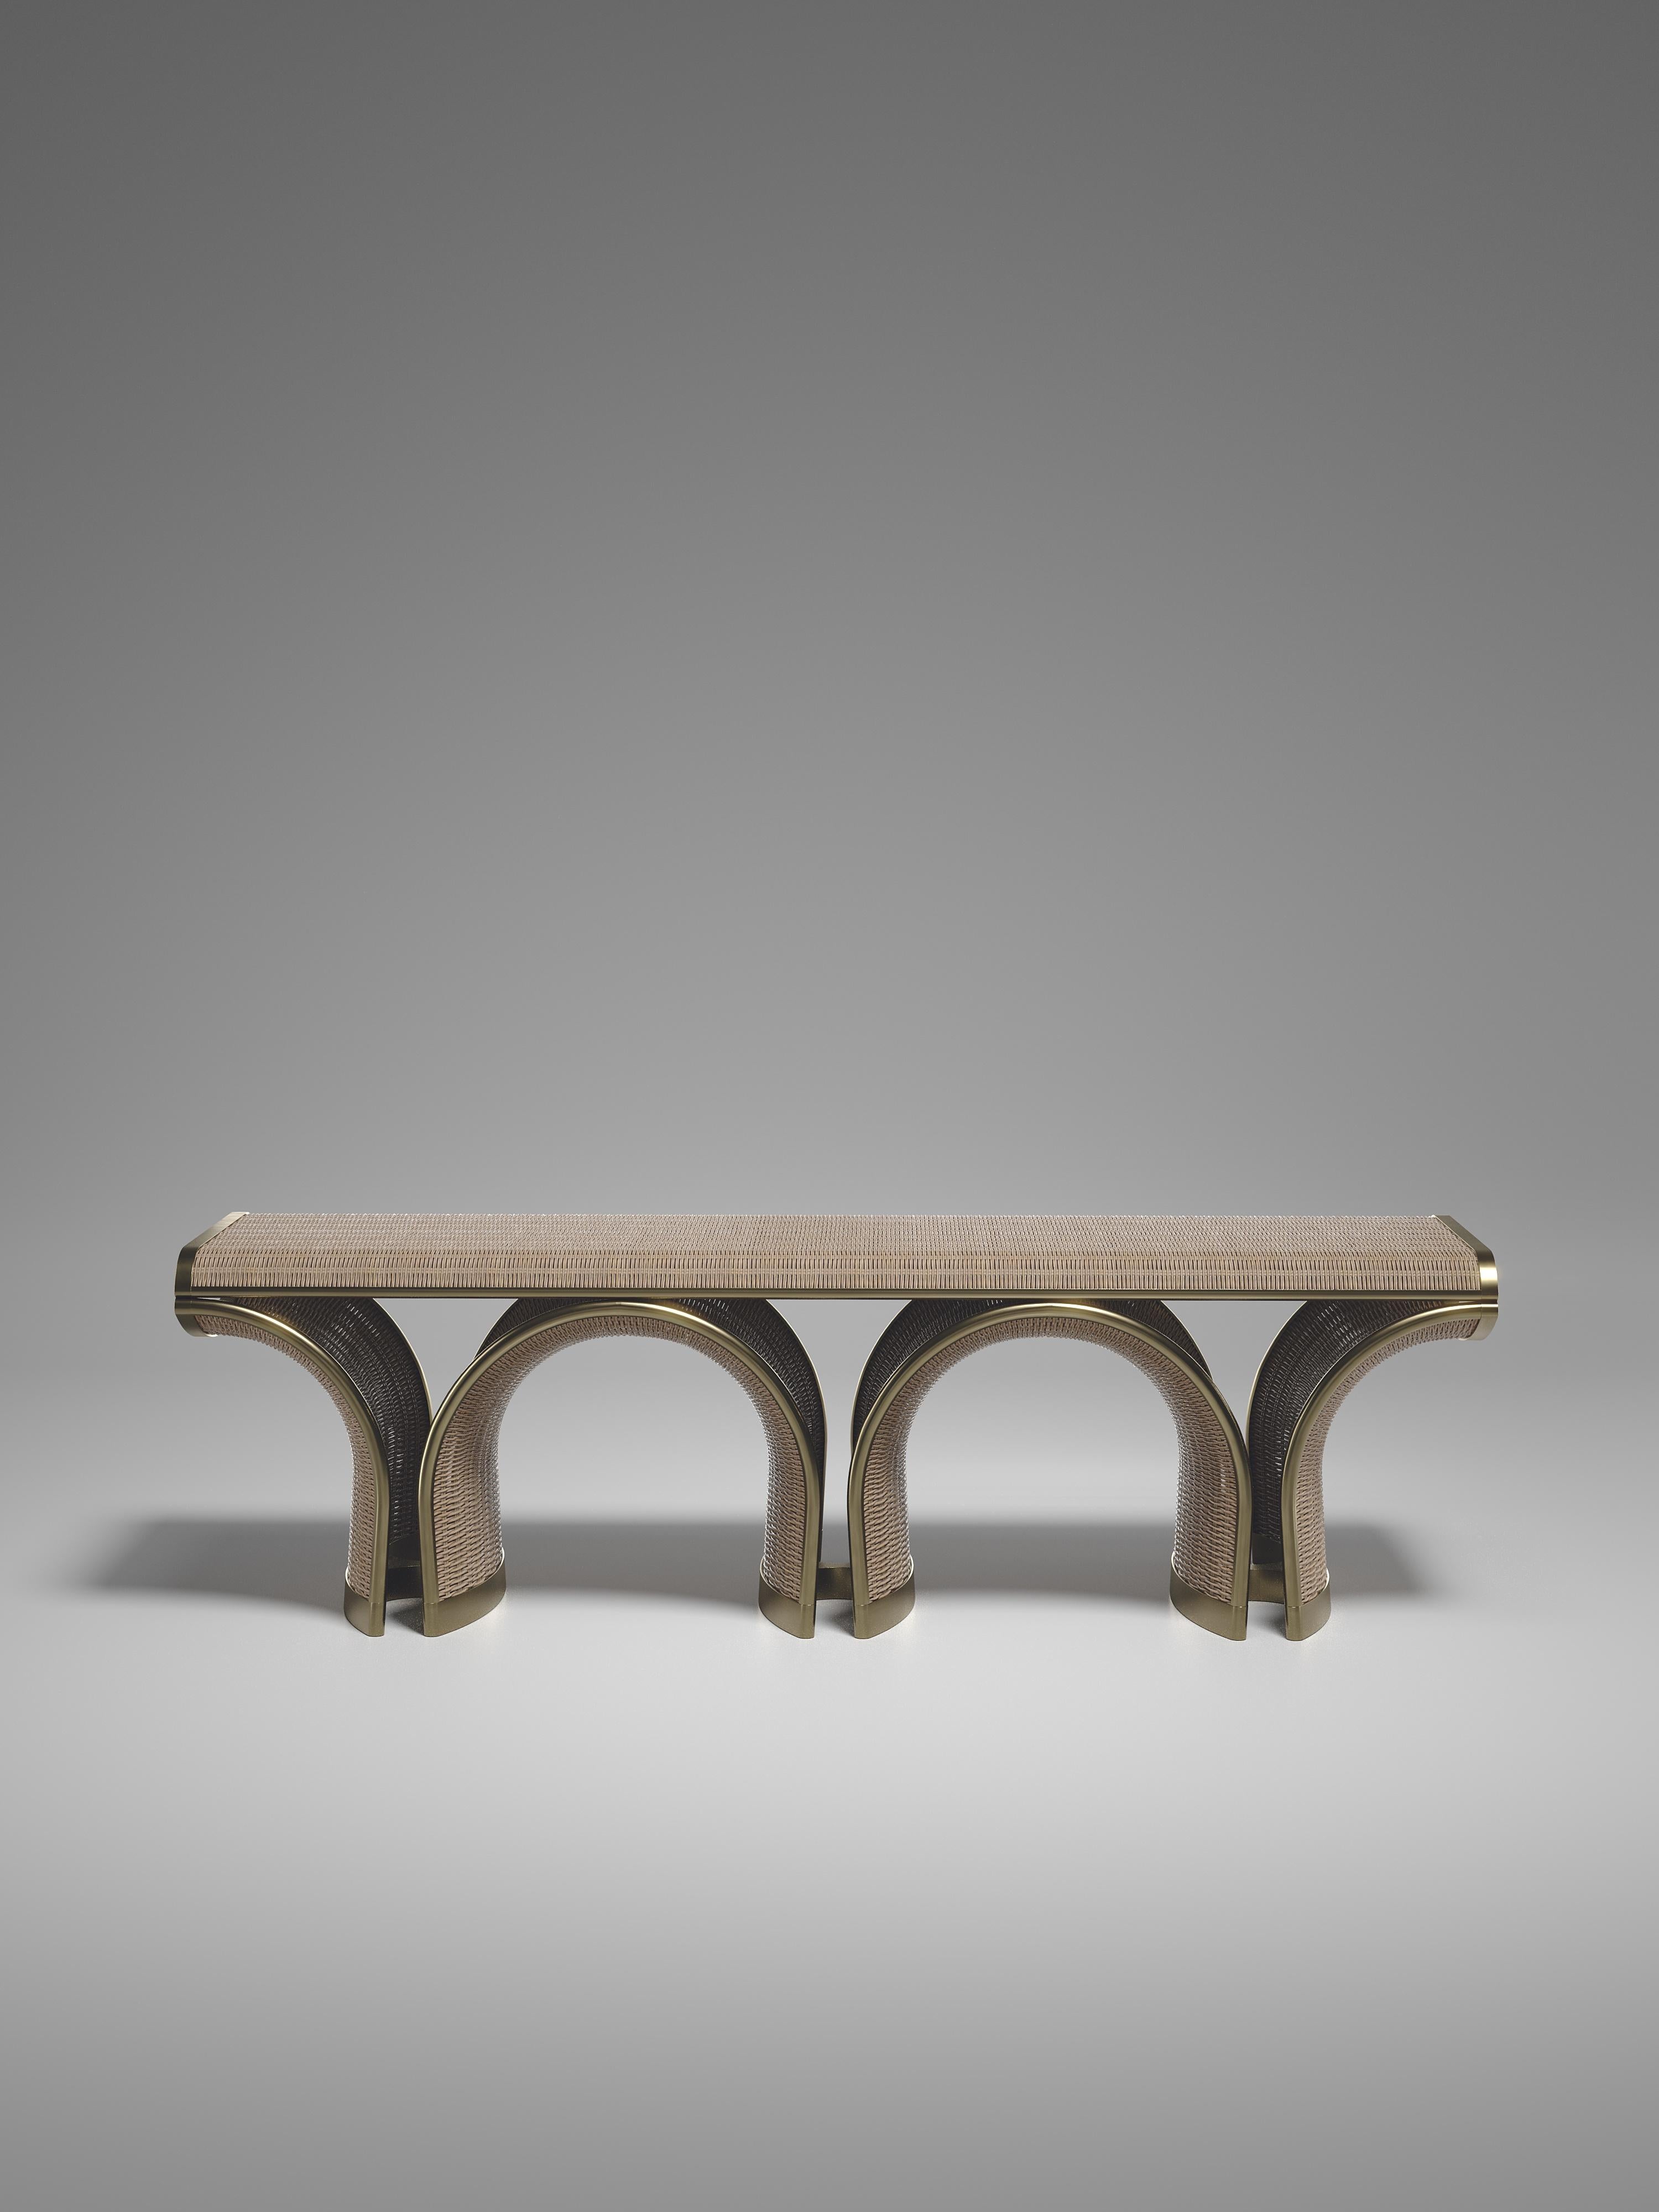 The Nymphea bench by R & Y Augousti is a part of their new Rattan capsule launch. The piece explores the brand's iconic DNA of bringing old world artisanal craft into a contemporary and utterly luxury feel. This seating piece is done in a natural